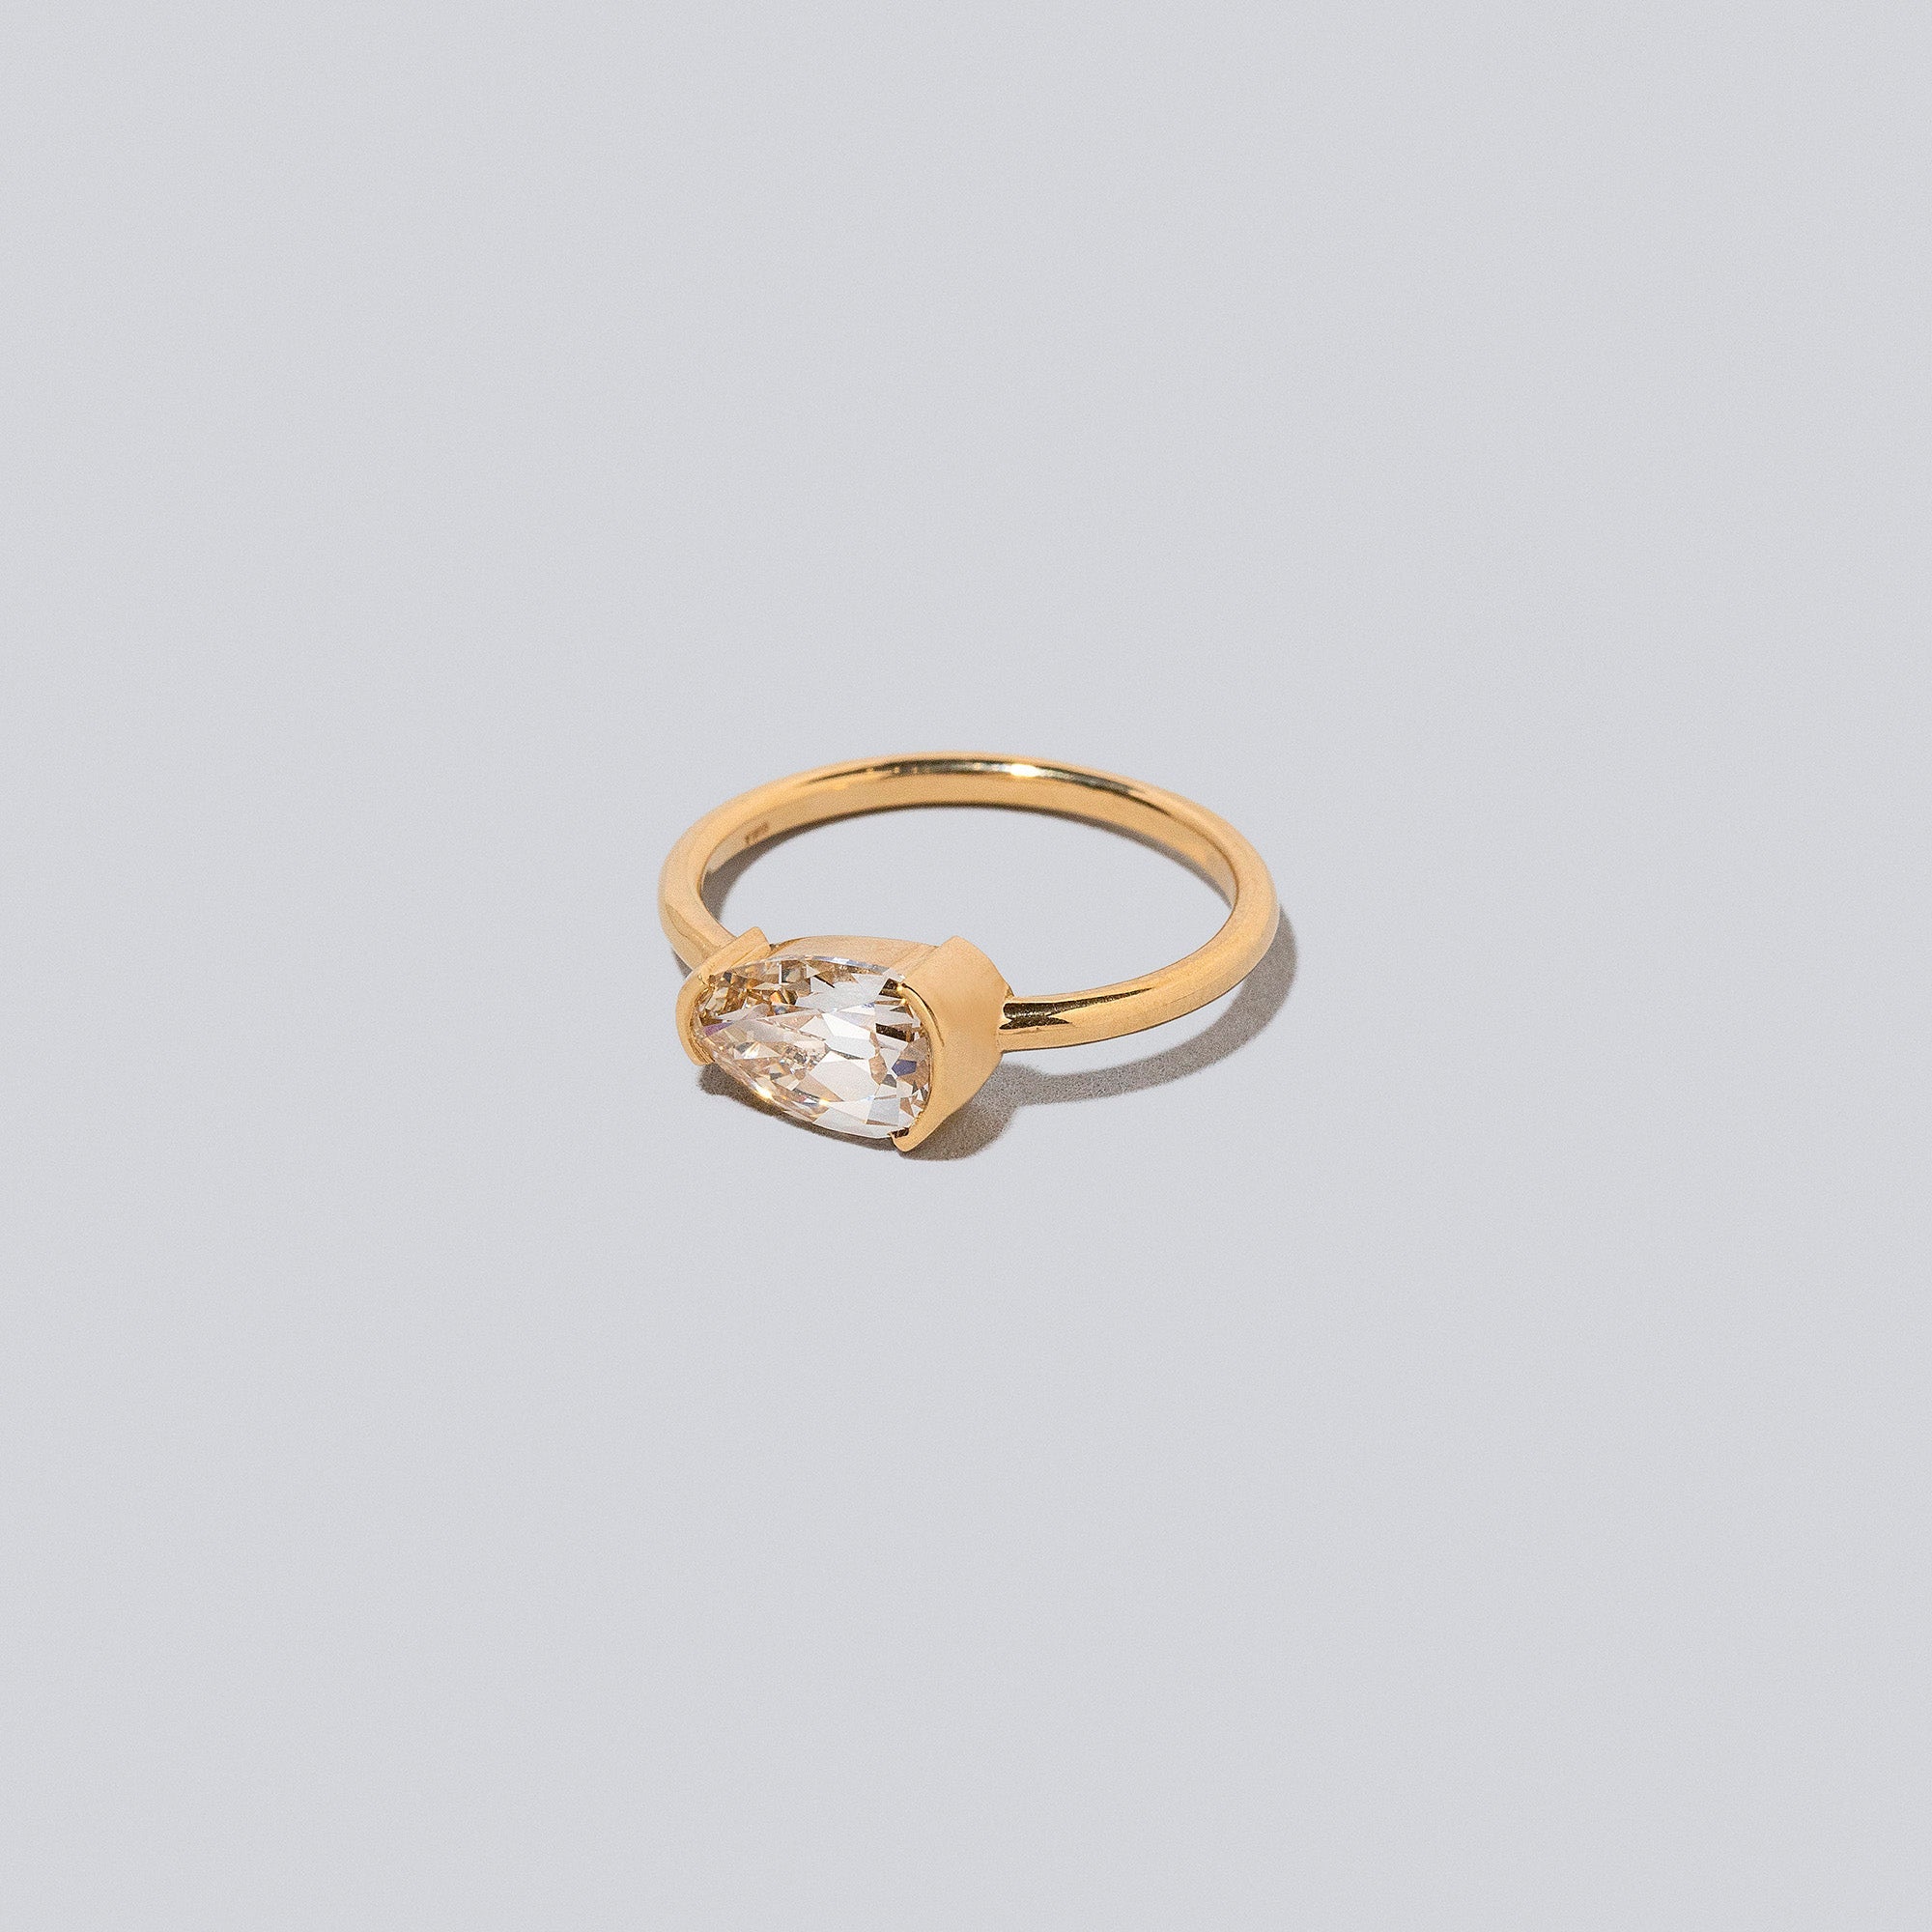 product_details::Innerspace Ring on light colored background.